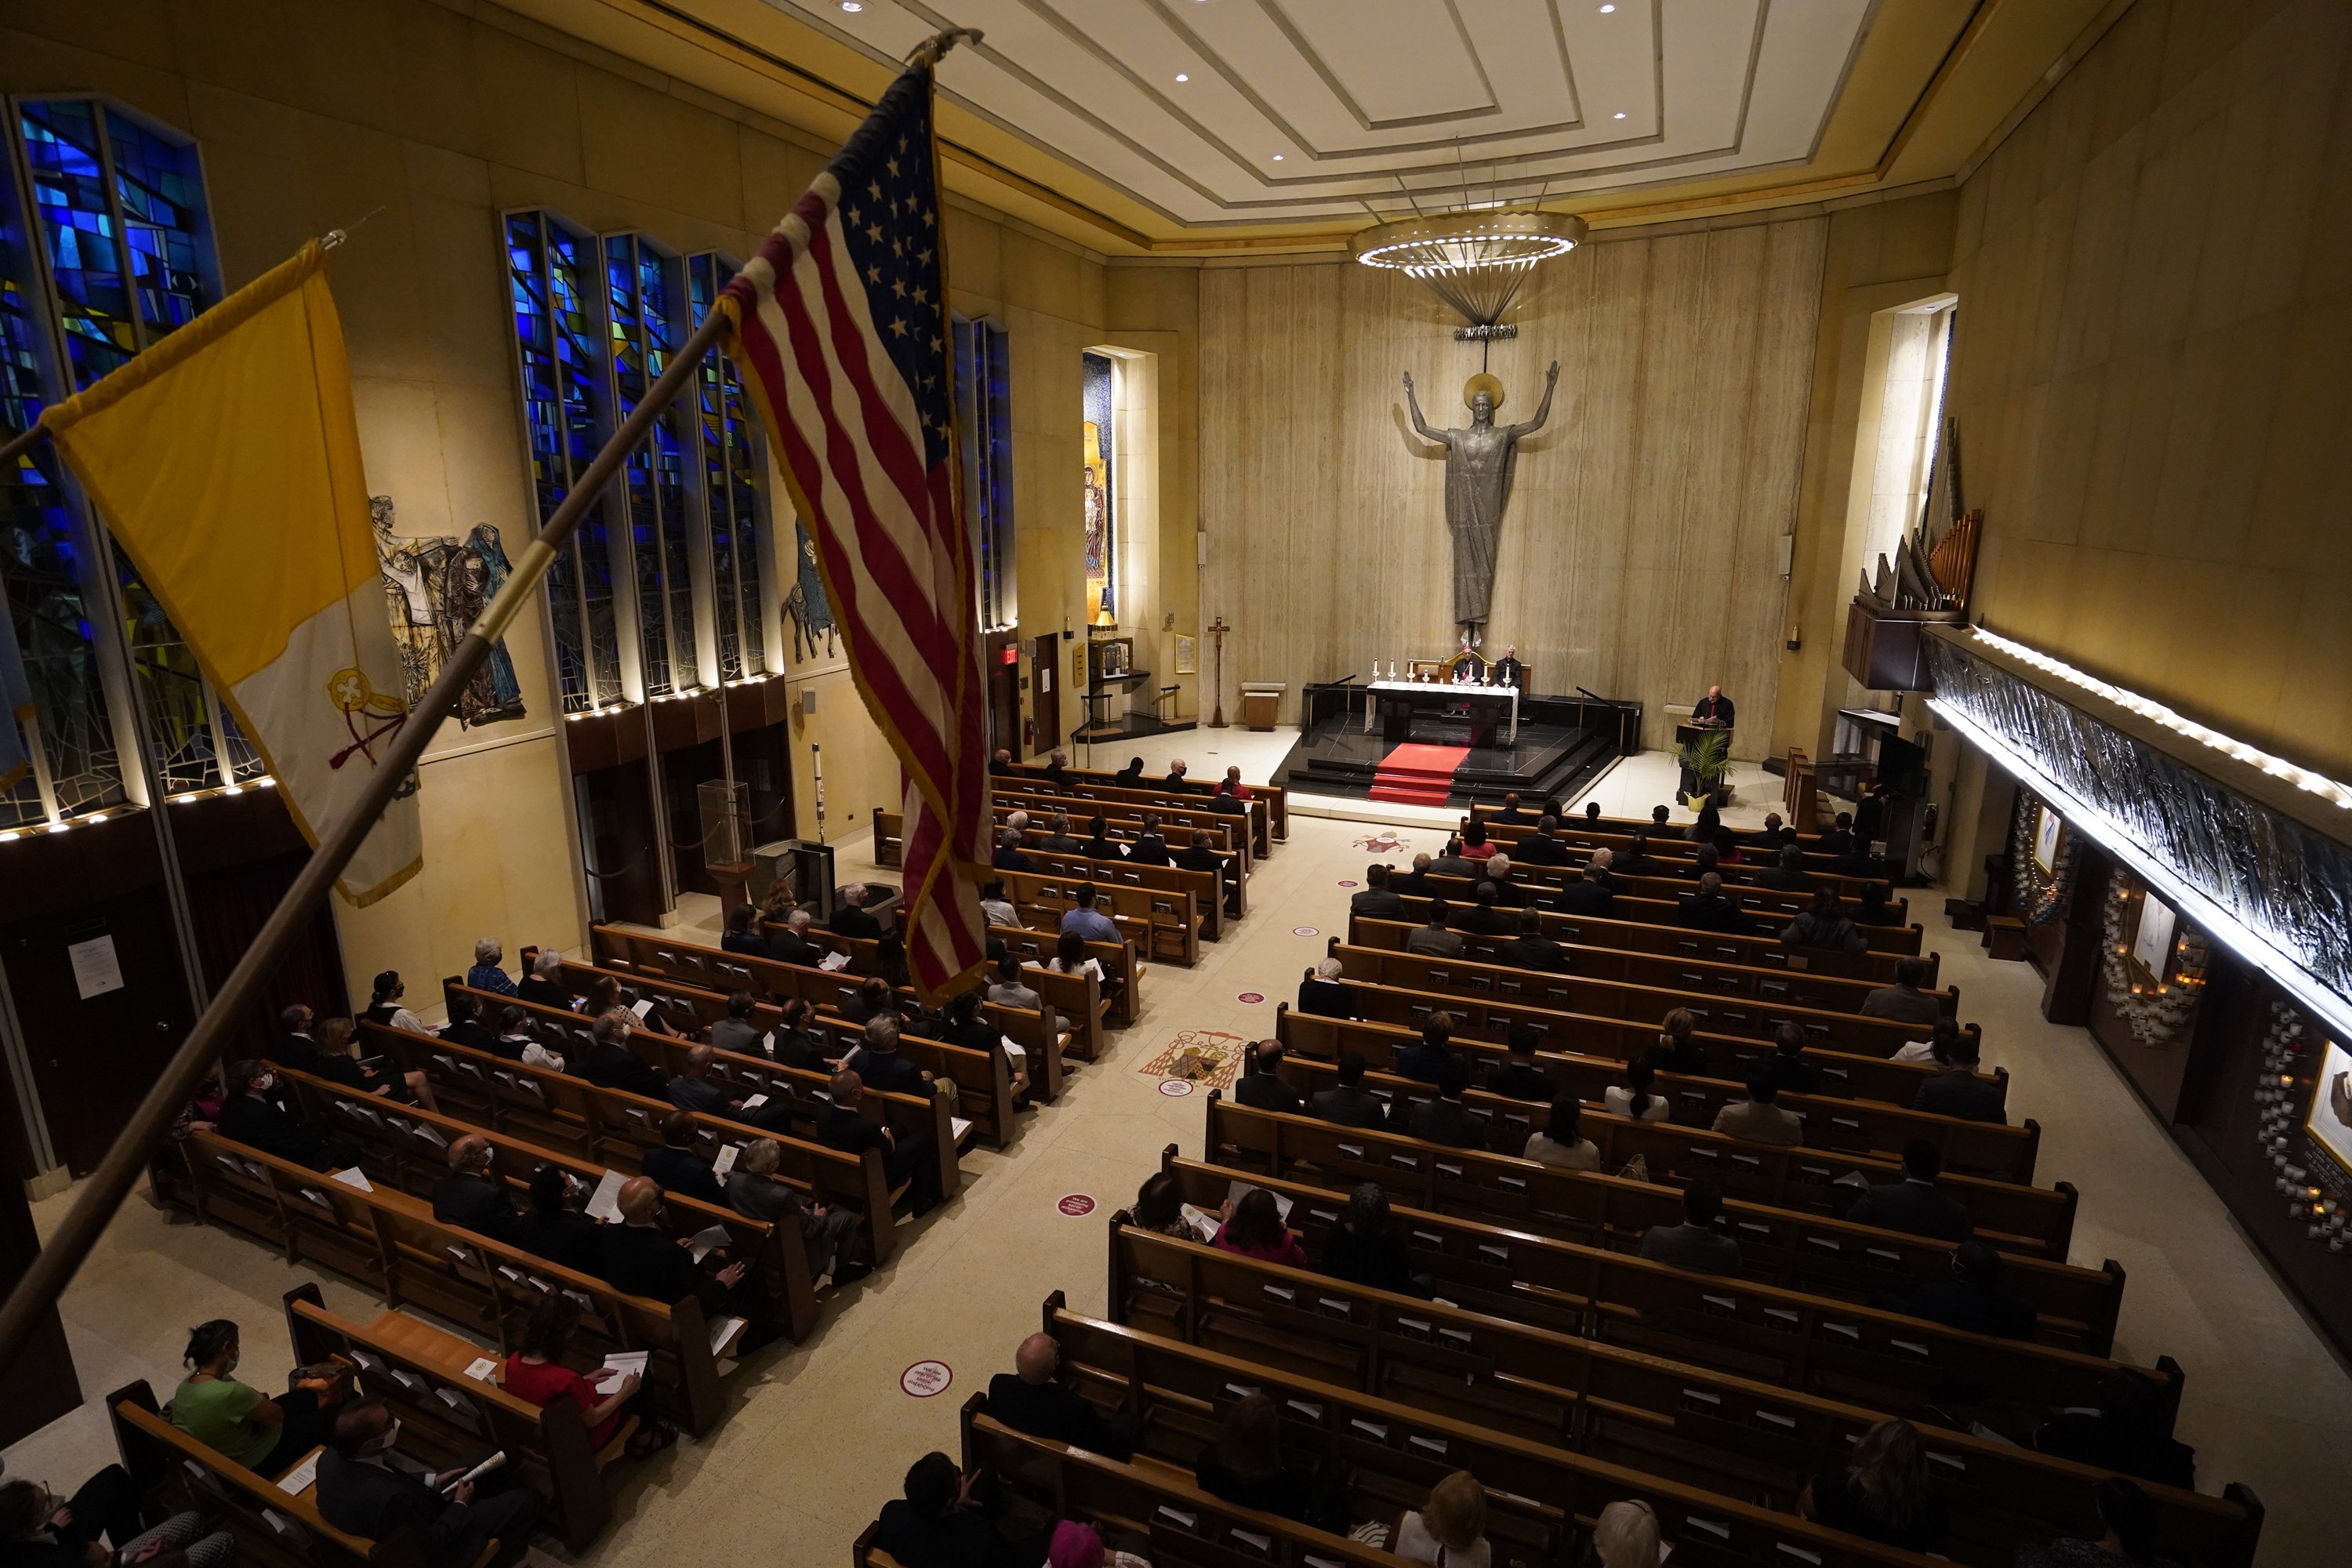 United Nations diplomats and other guests gather for a prayer service Sept. 13, 2021, at Holy Family Church in New York City. The service, hosted by the Vatican's permanent observer mission to the U.N., was held on the eve of the opening of the 76th sessi